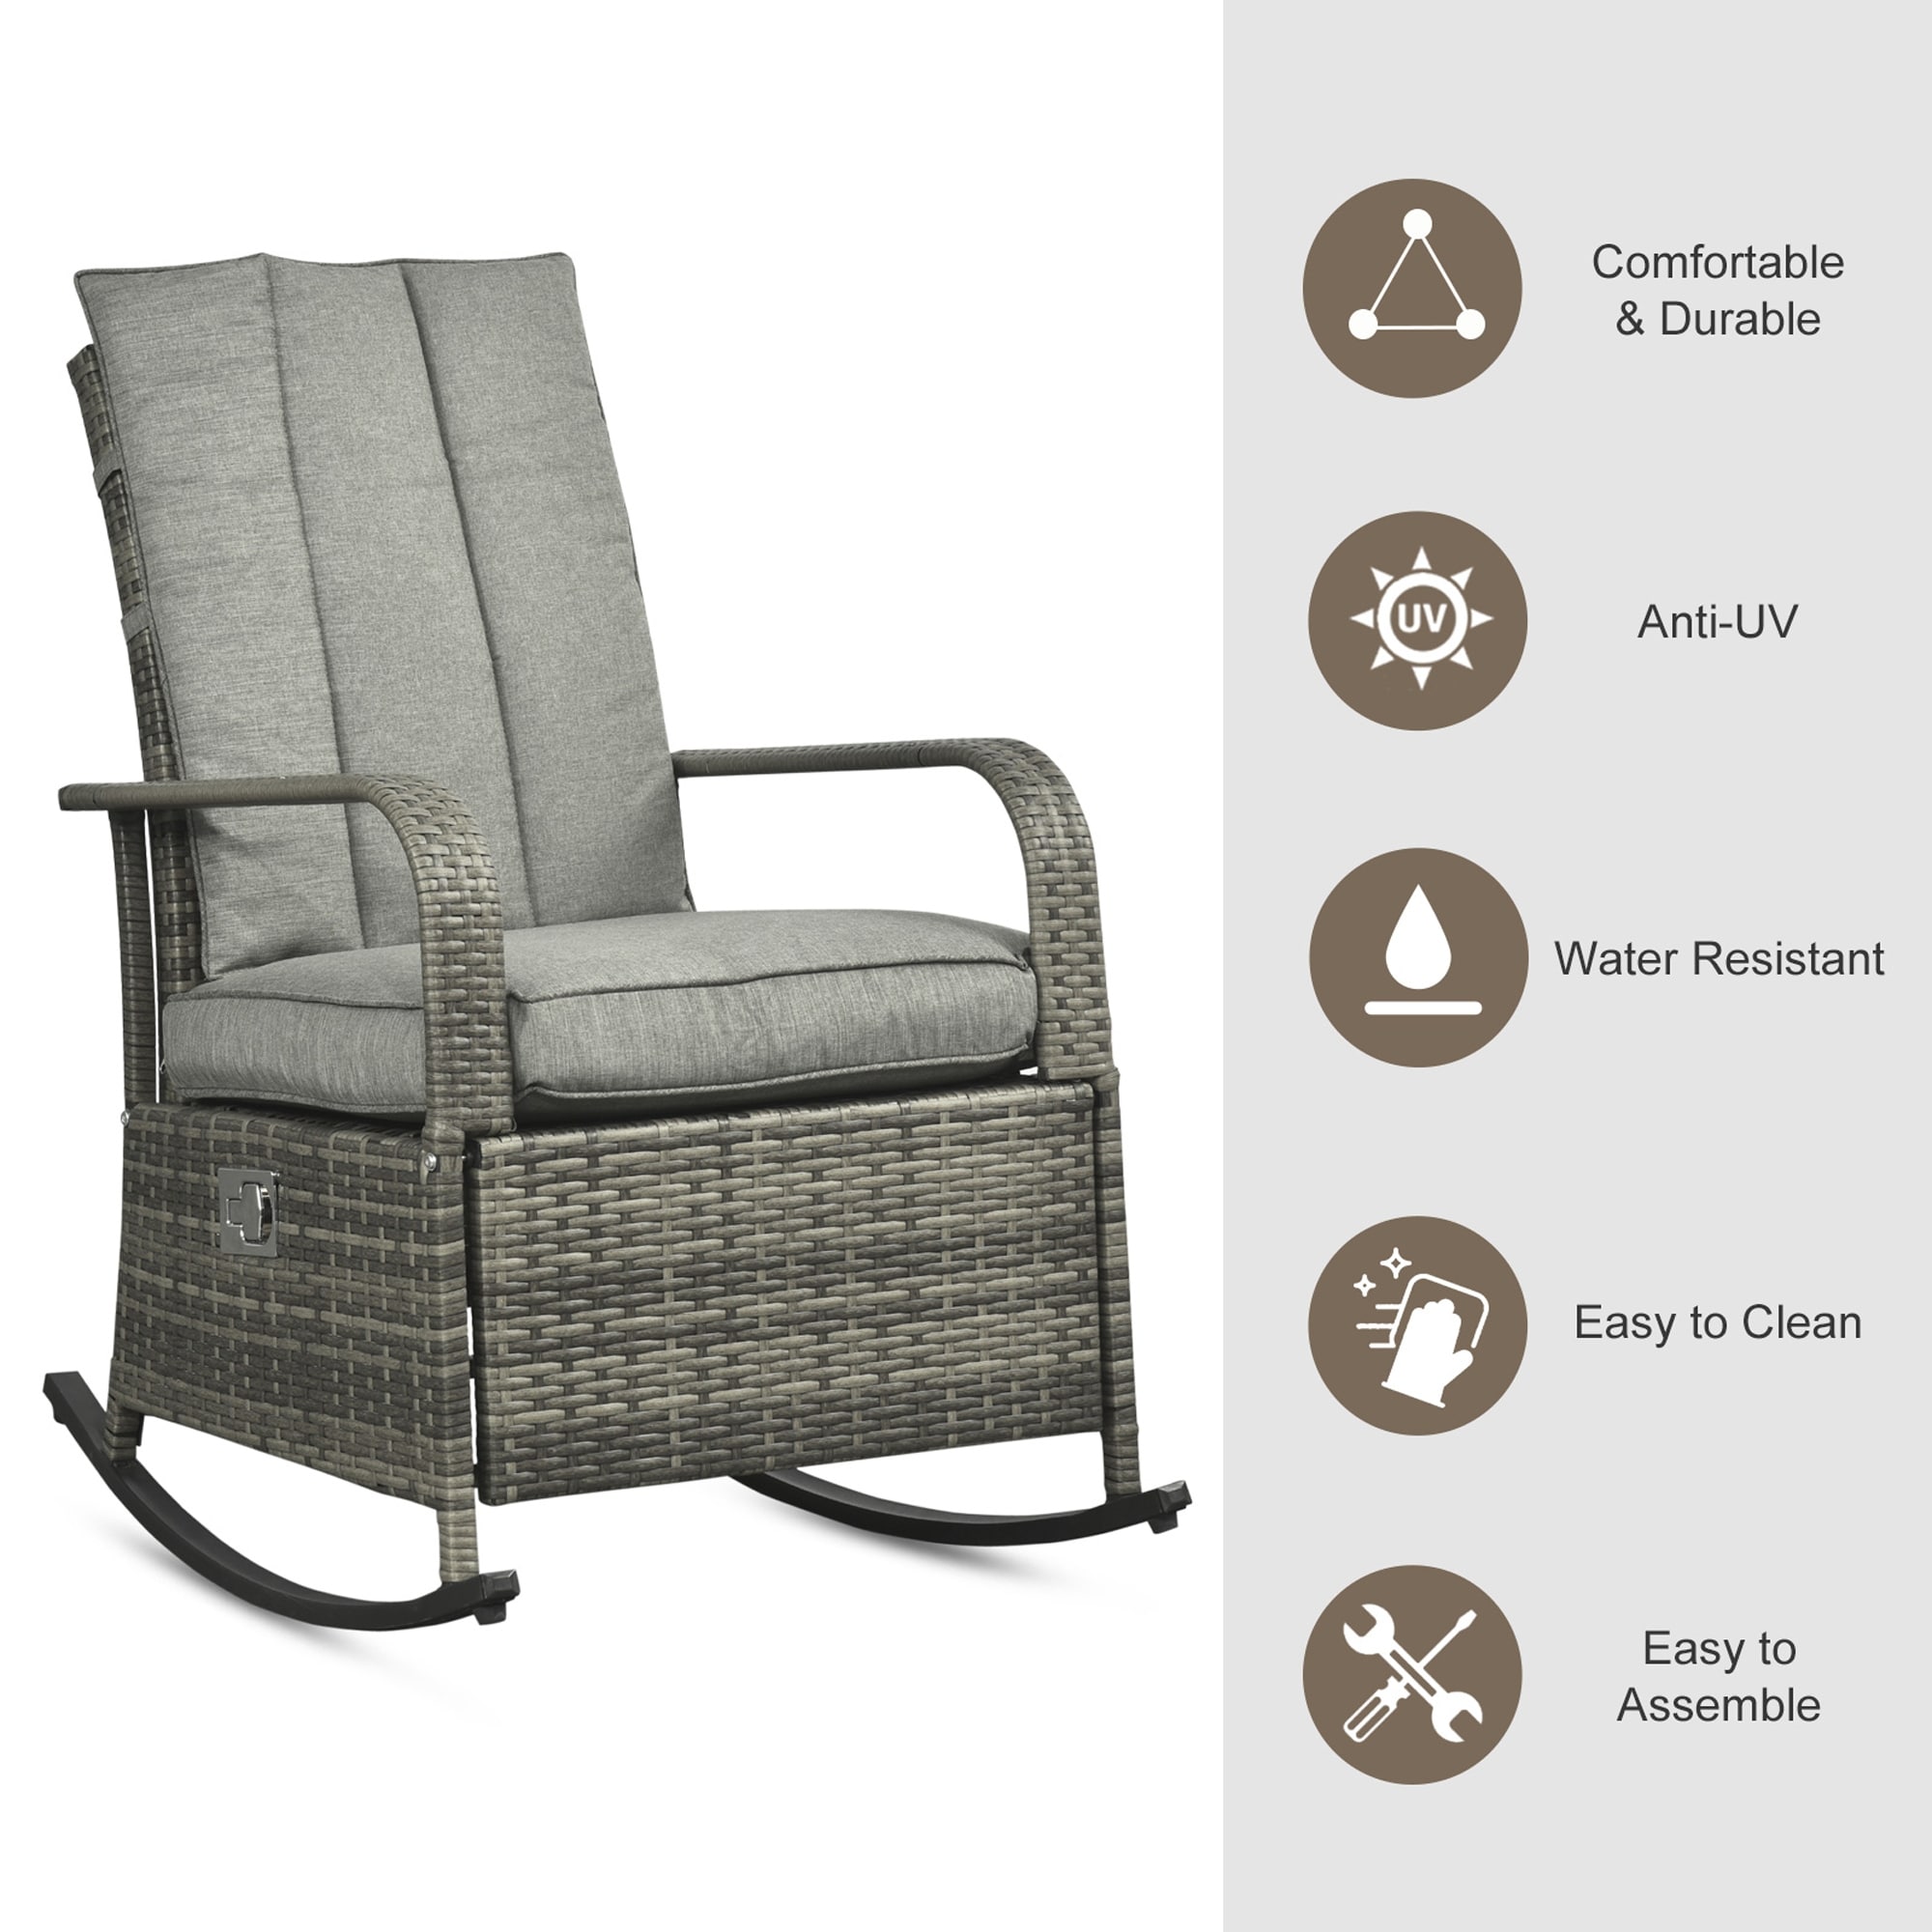 Outsunny Outdoor Wicker Rattan Recliner Rocking Cushioned Chair with Footrest & 135 Degrees of Comfort - Cream White